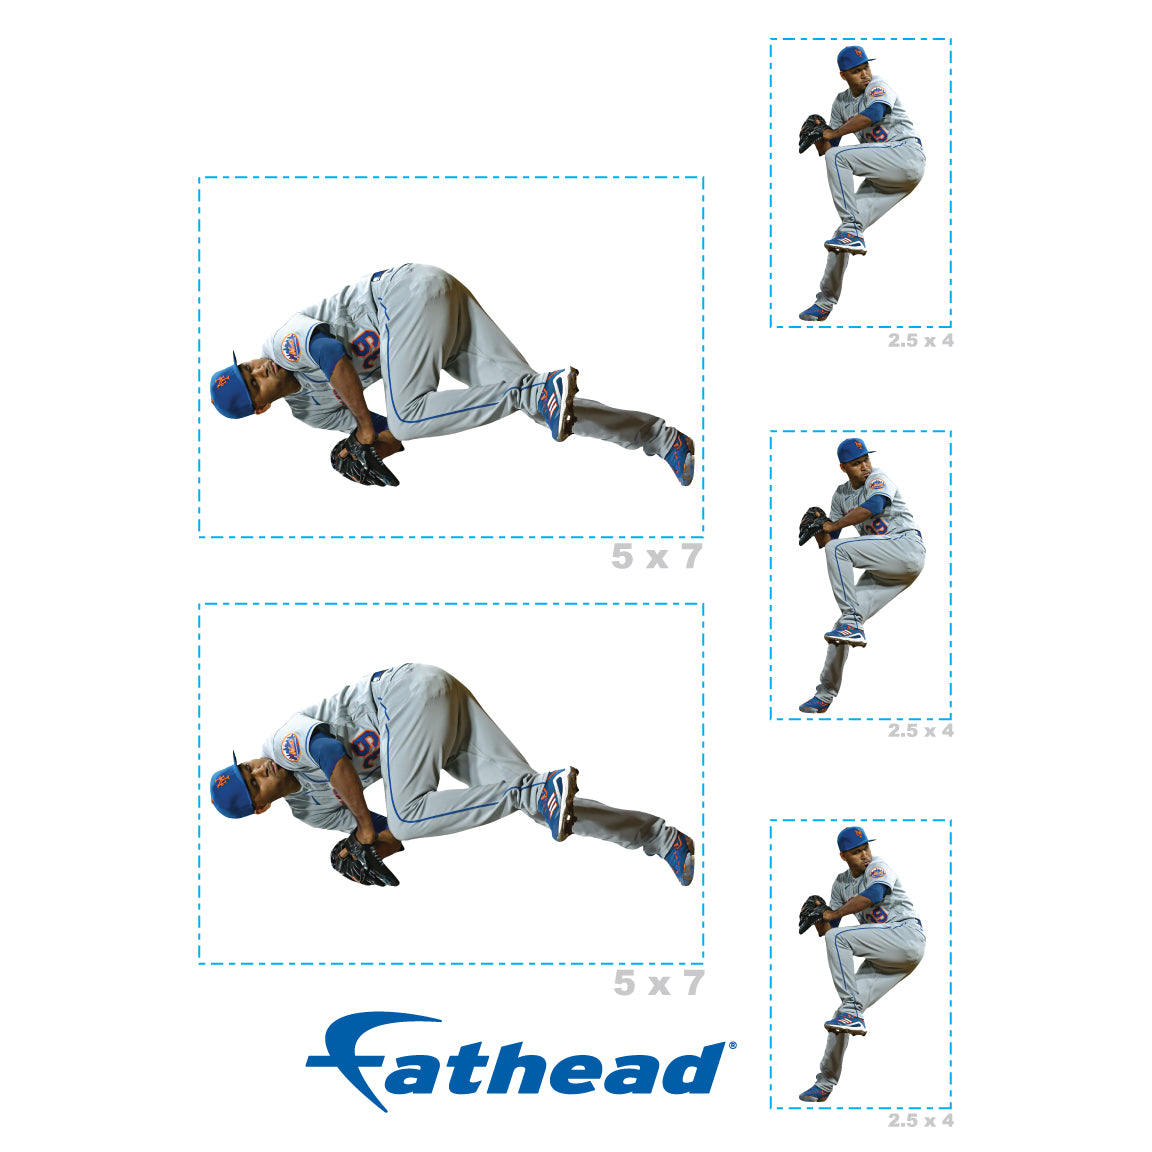 New York Mets: Edwin Diaz 2022 - Officially Licensed MLB Removable